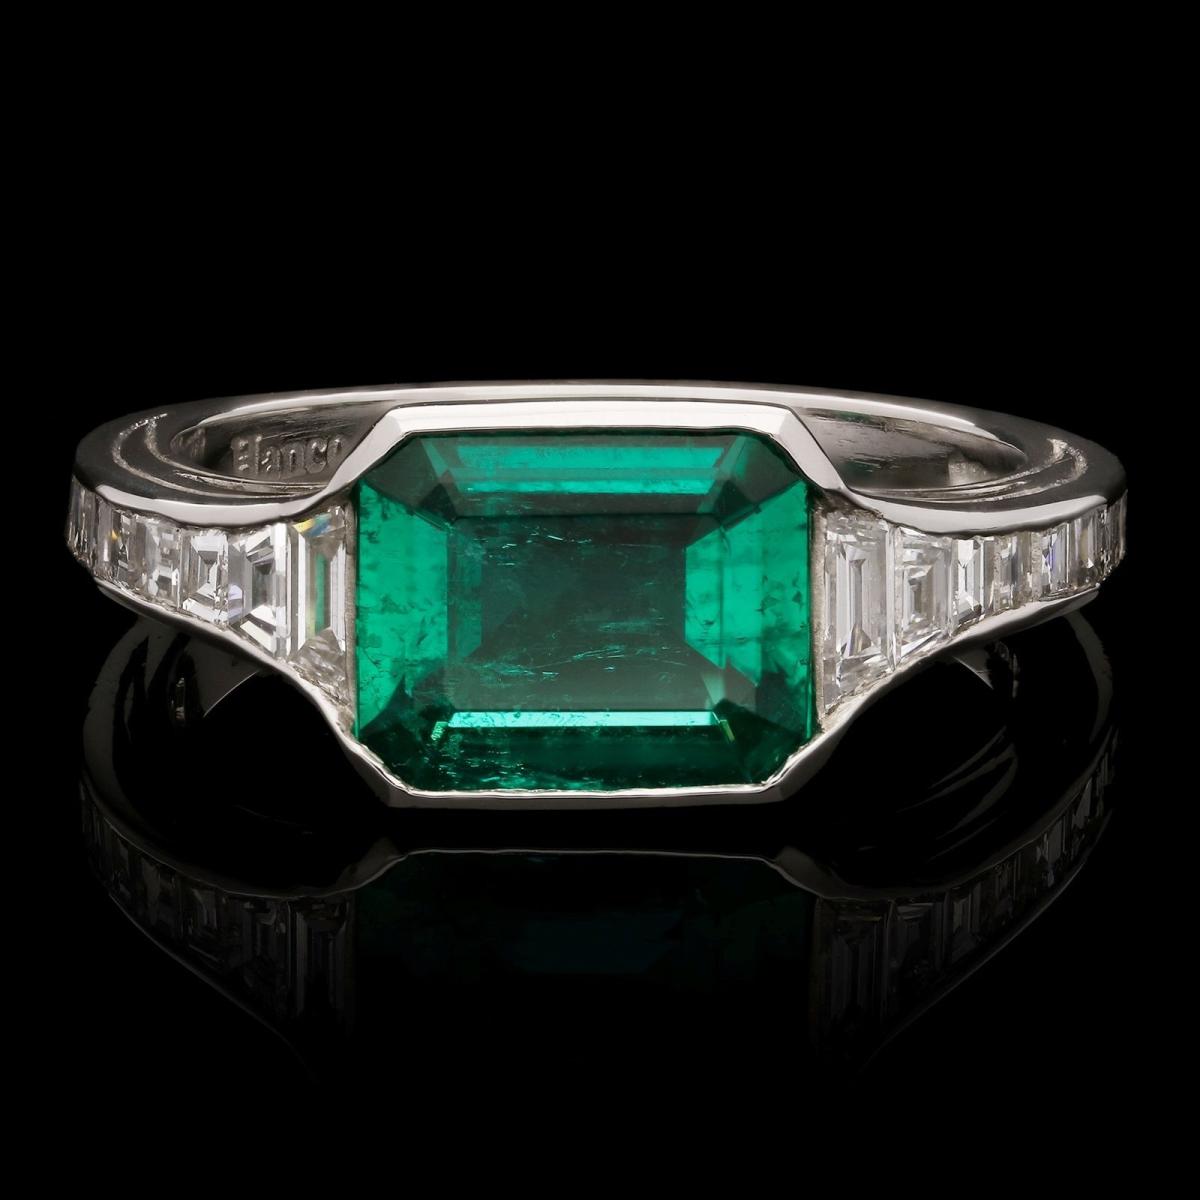 An elegant Colombian emerald ring set in platinum with calibre step-cut diamond shoulders